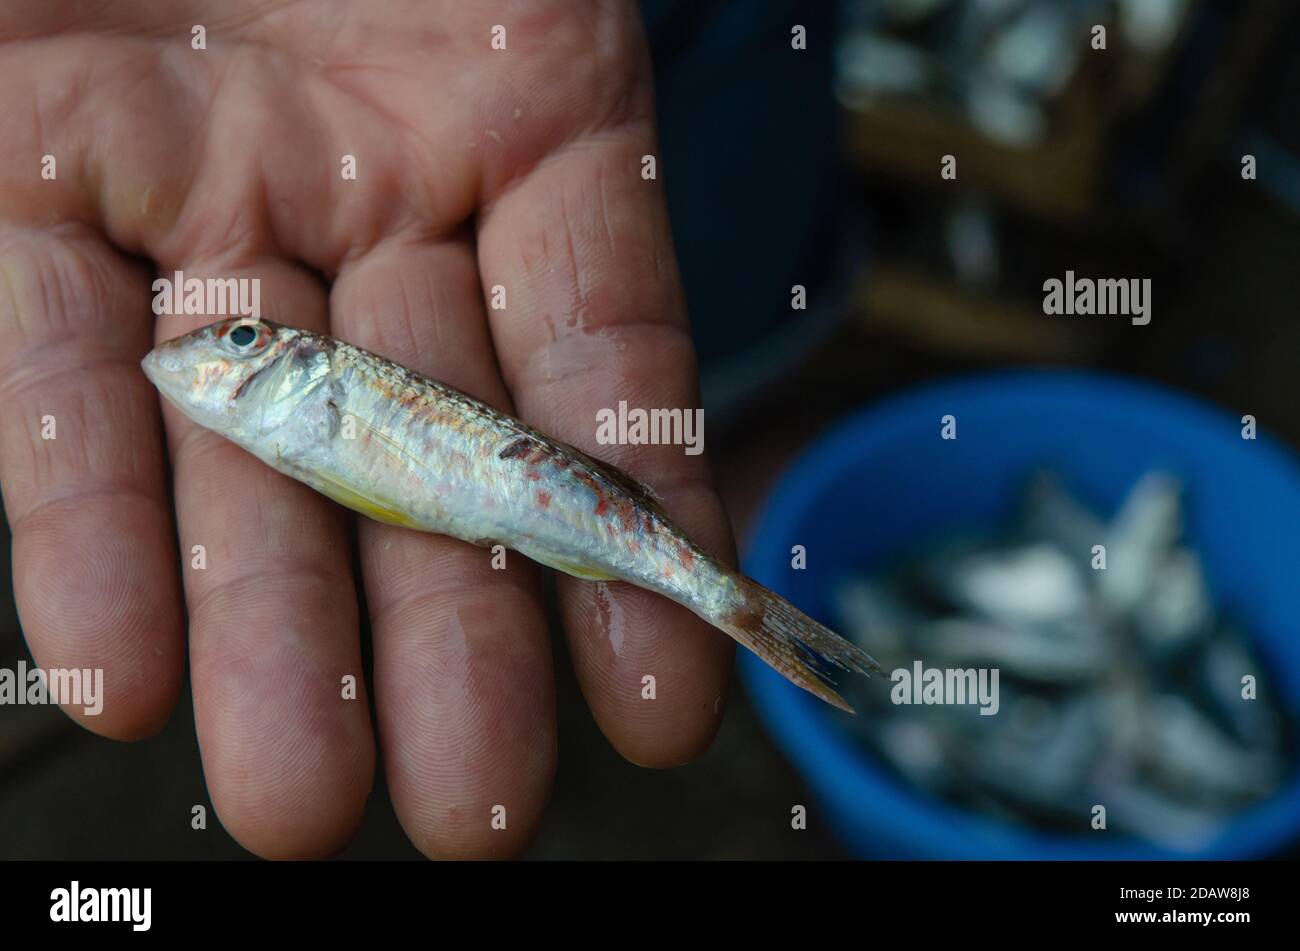 A Turkish fisherman holds a tiny fish caught in the Black Sea